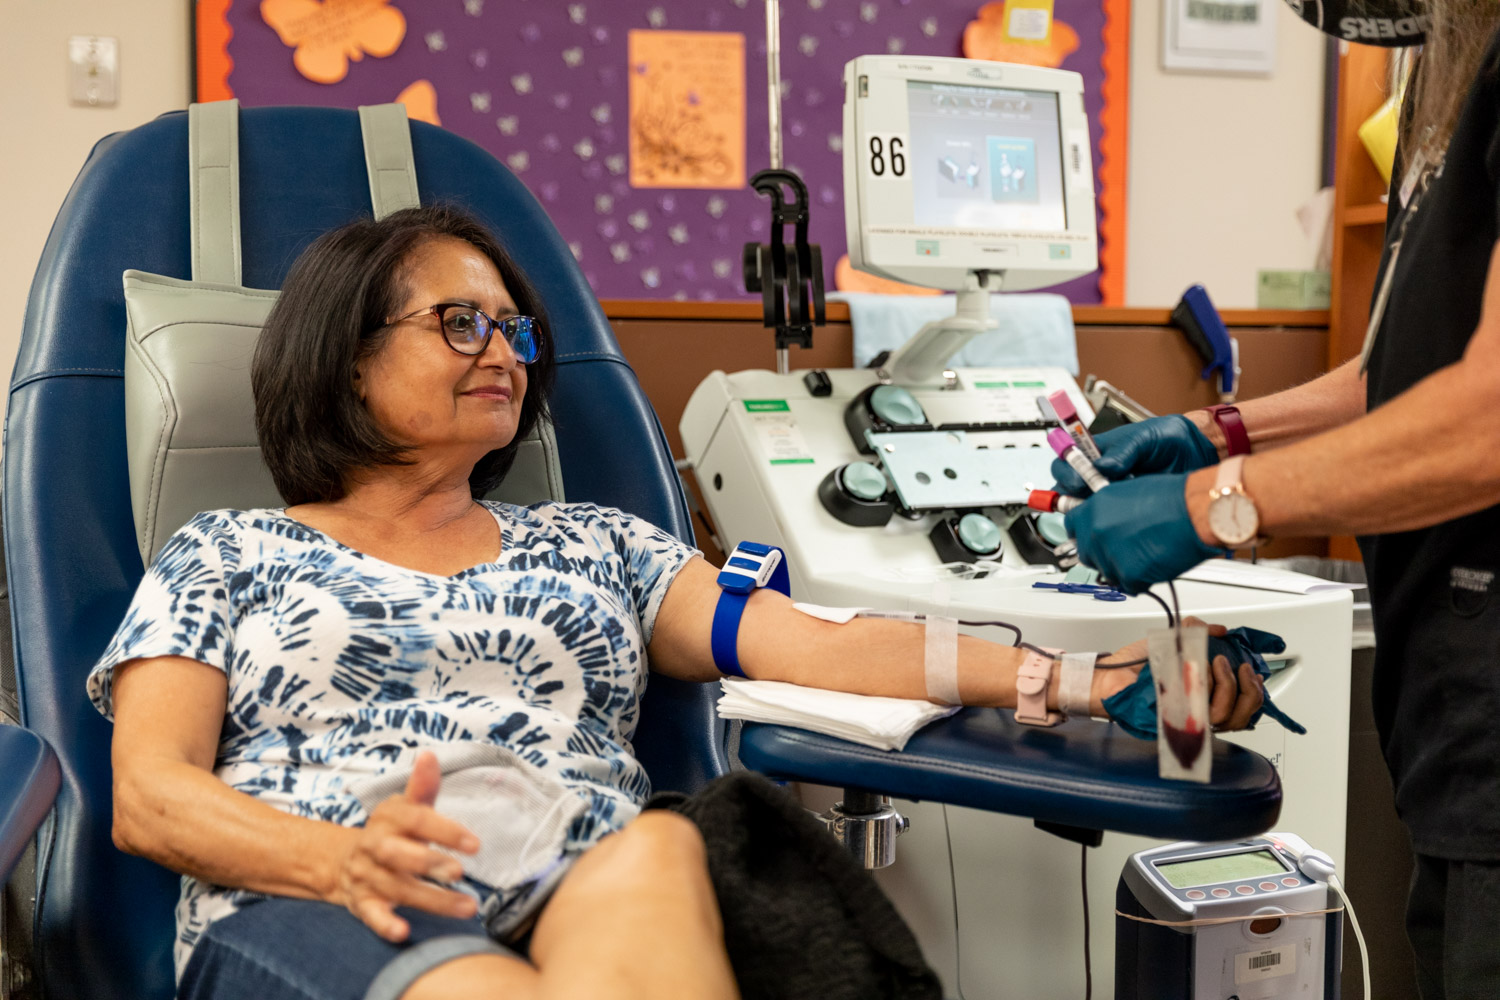 RHA Events: Woman donating blood at a Vitalant Blood Drive event